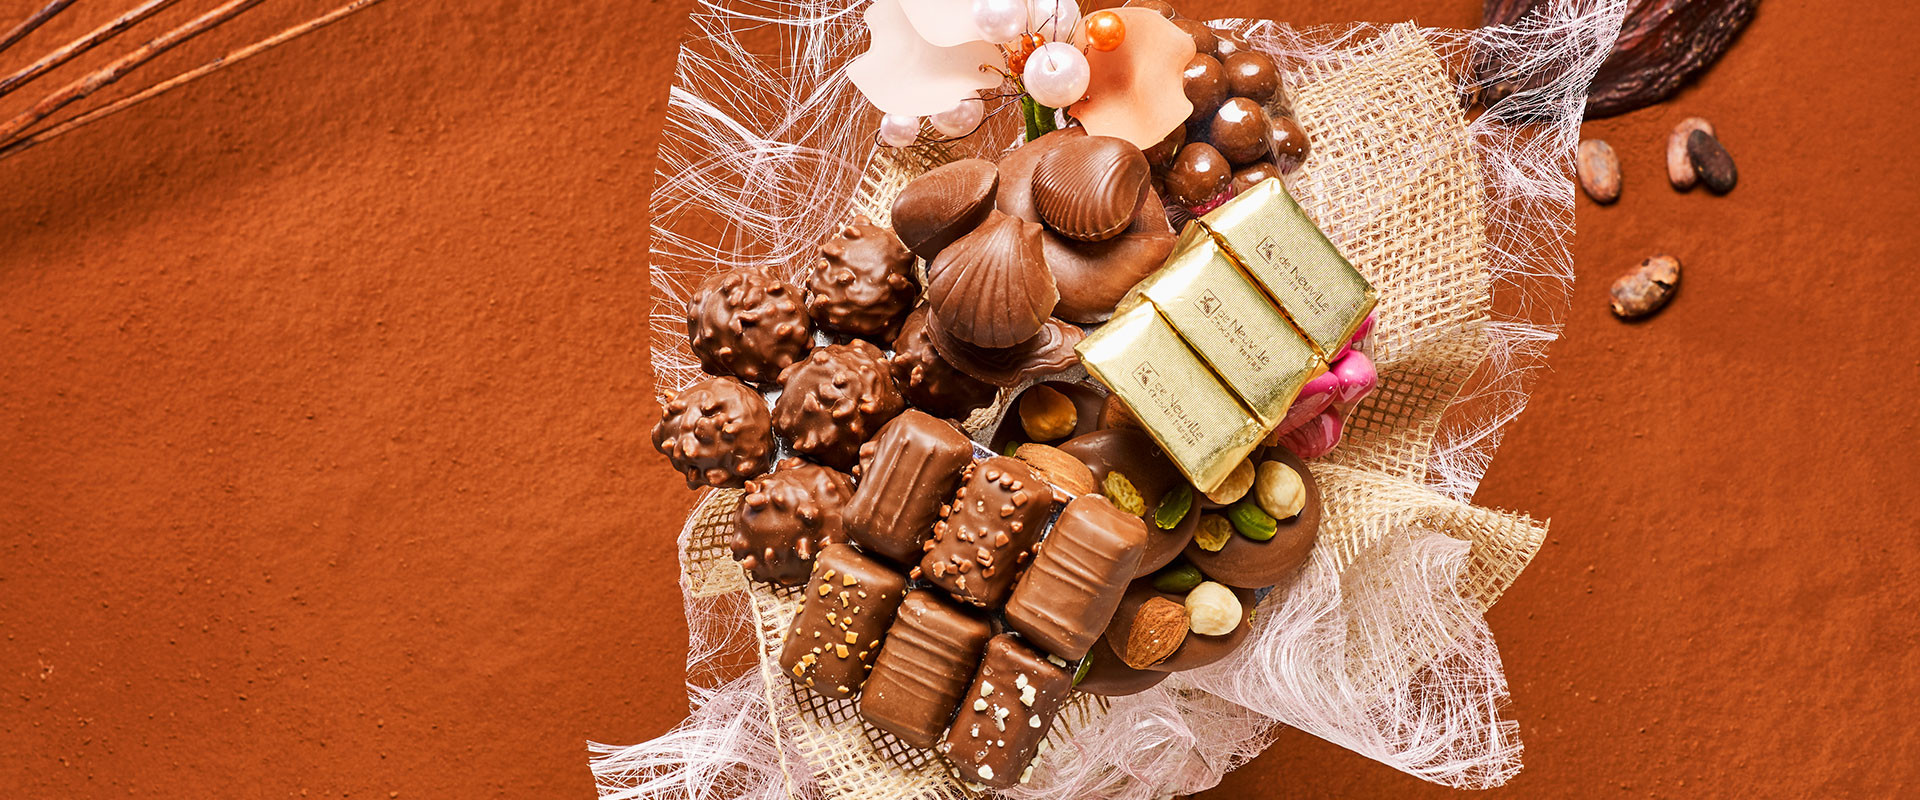 Assortiment chocolats lait made in France